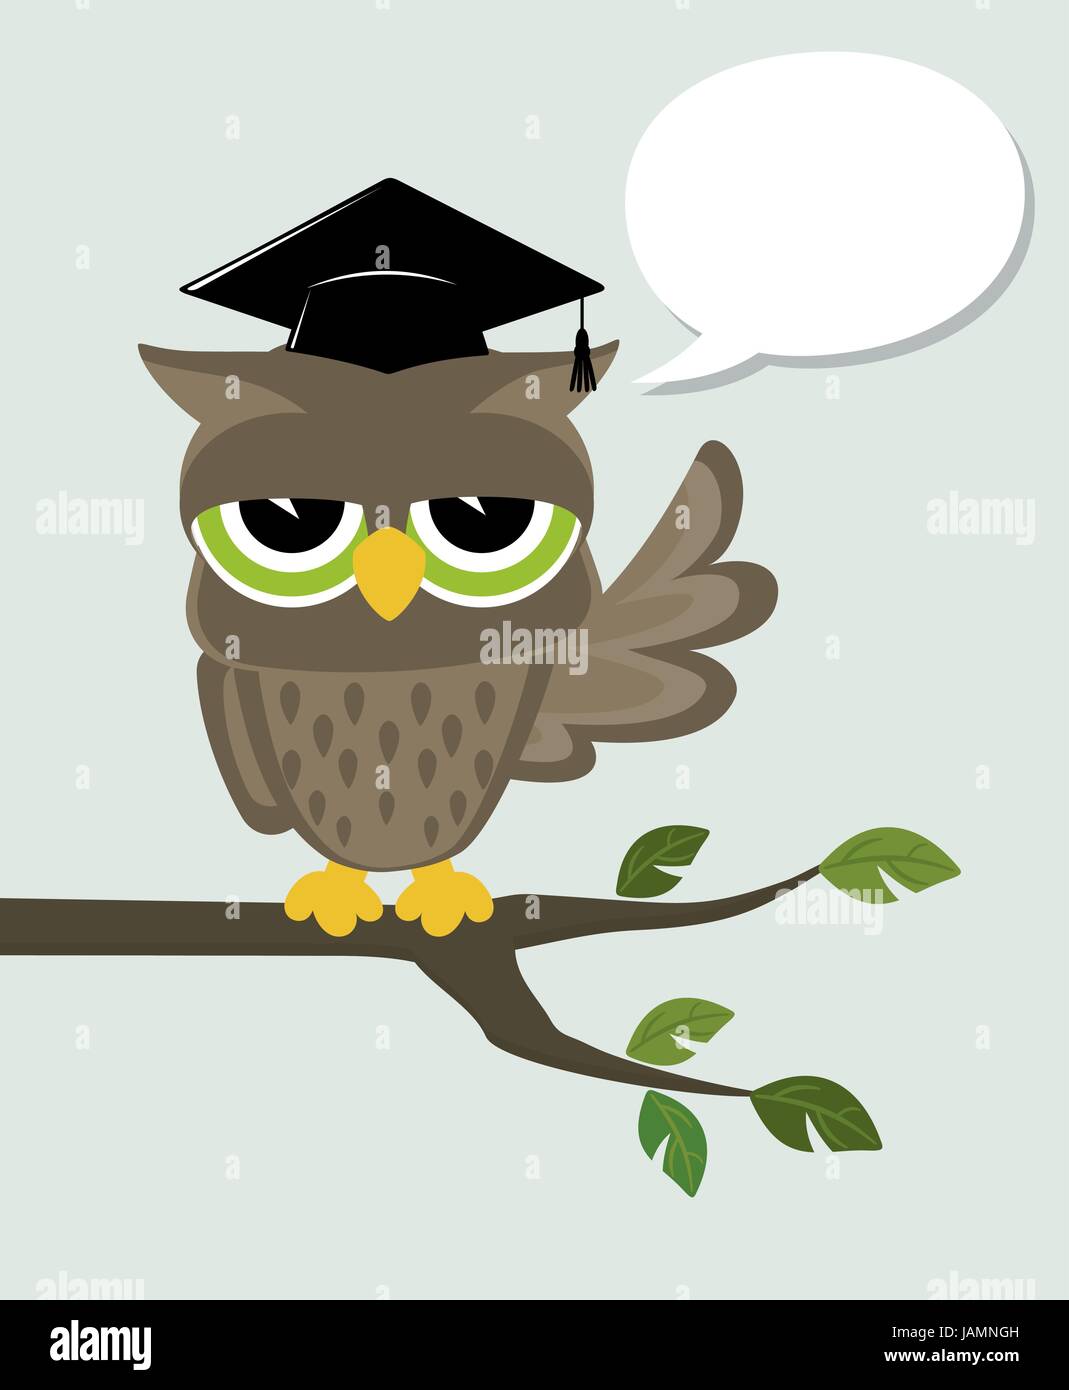 wise owl with mortarboard sitting on a branch and text balloon Stock Vector